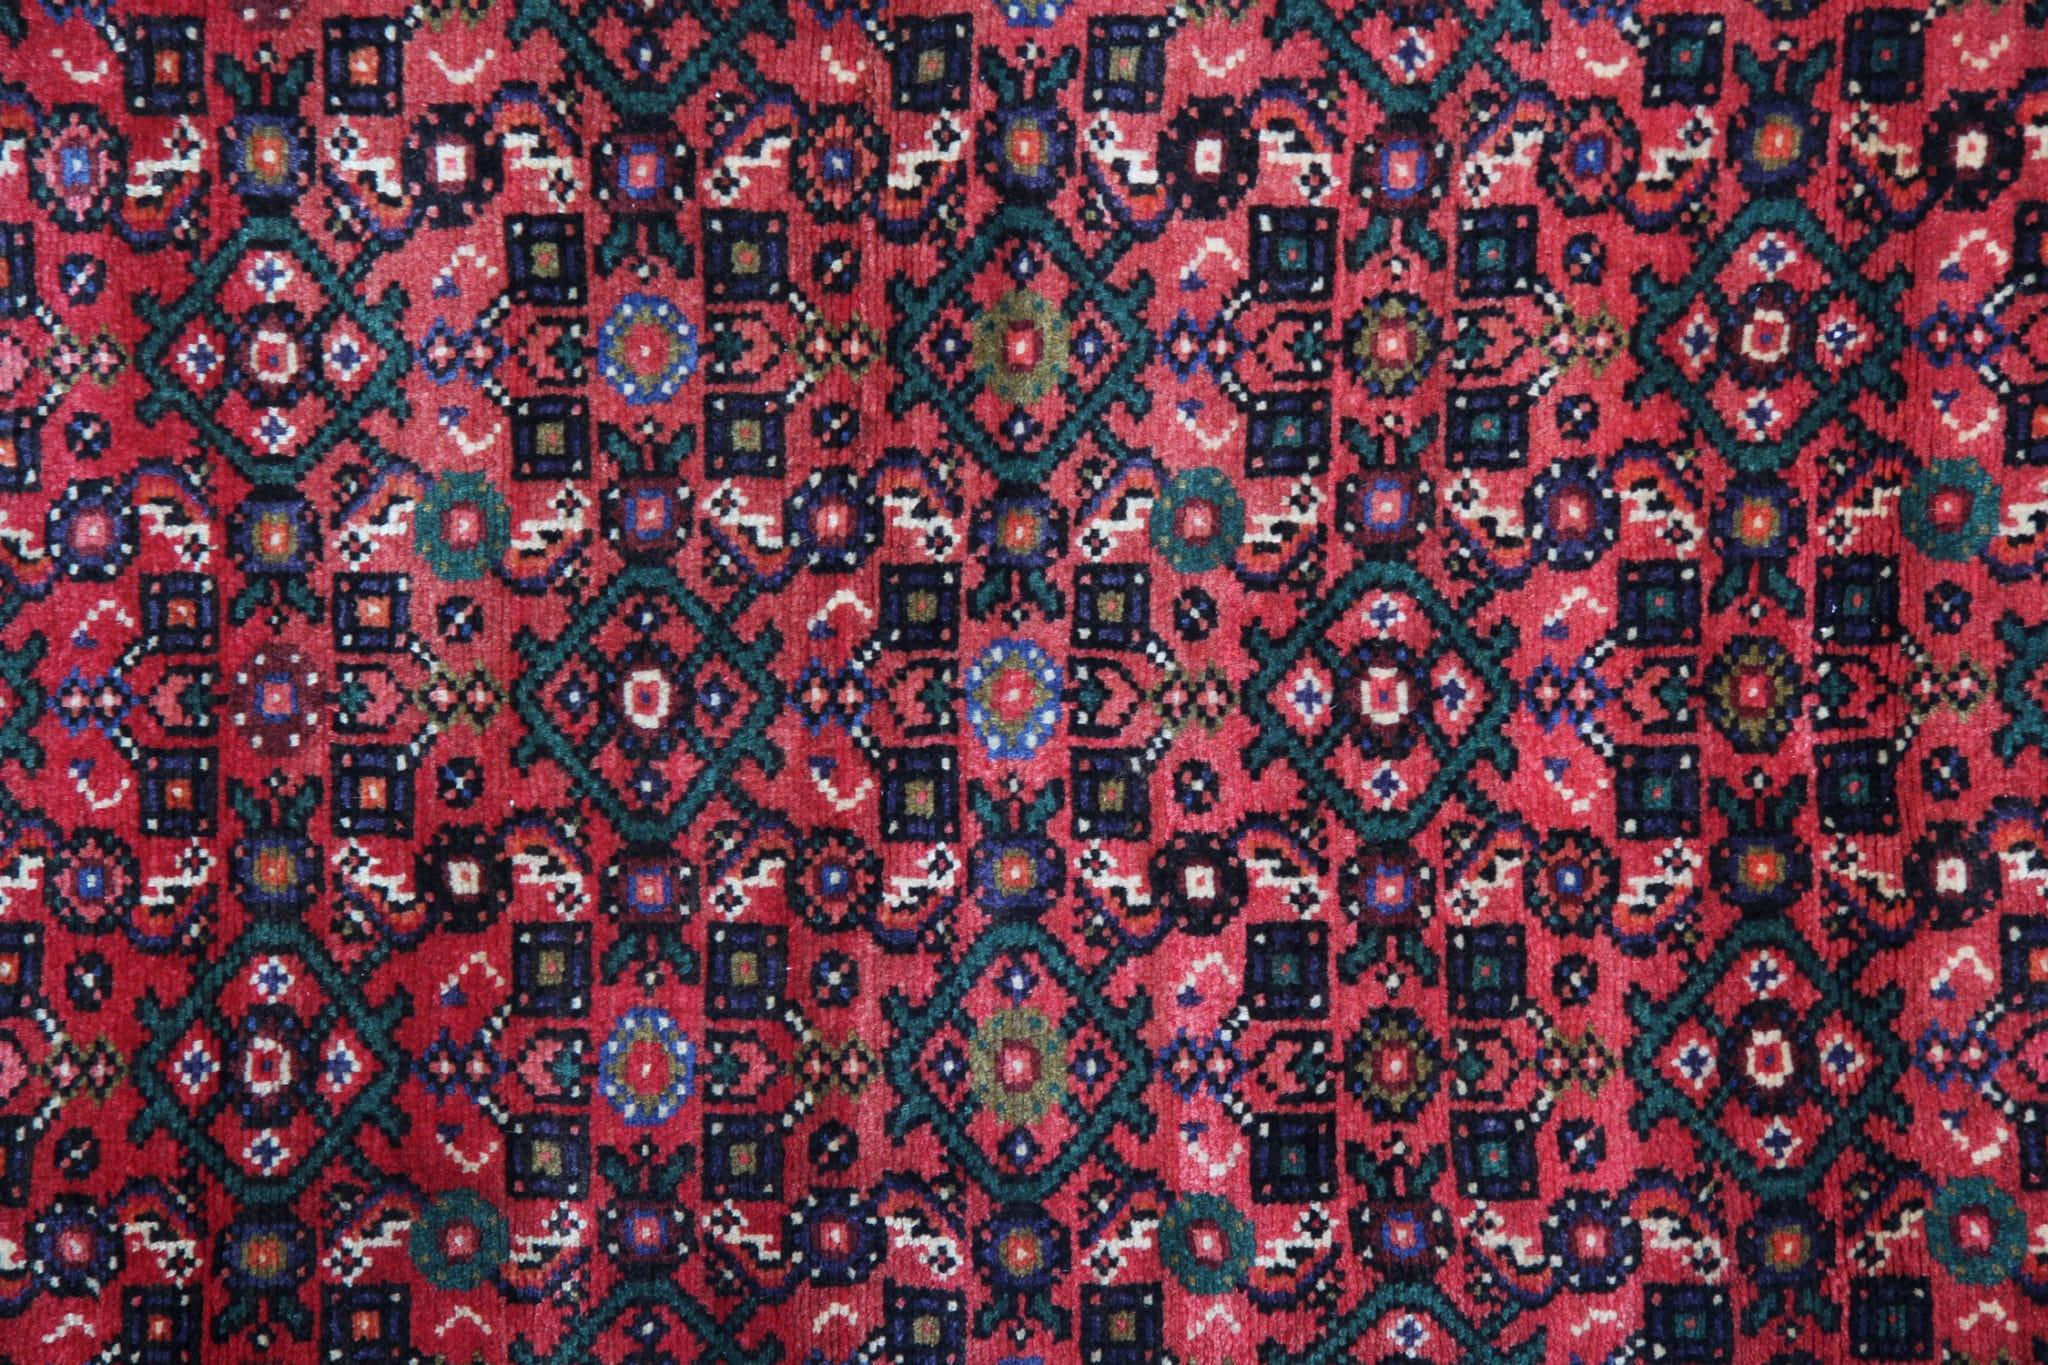 This gorgeous handmade carpet wool runner rug has been beautifully handwoven in stunning red, deep blue and subtle creams. Delicate designs of rustic and traditional patterns are woven throughout, a deep red all over design in this long stair